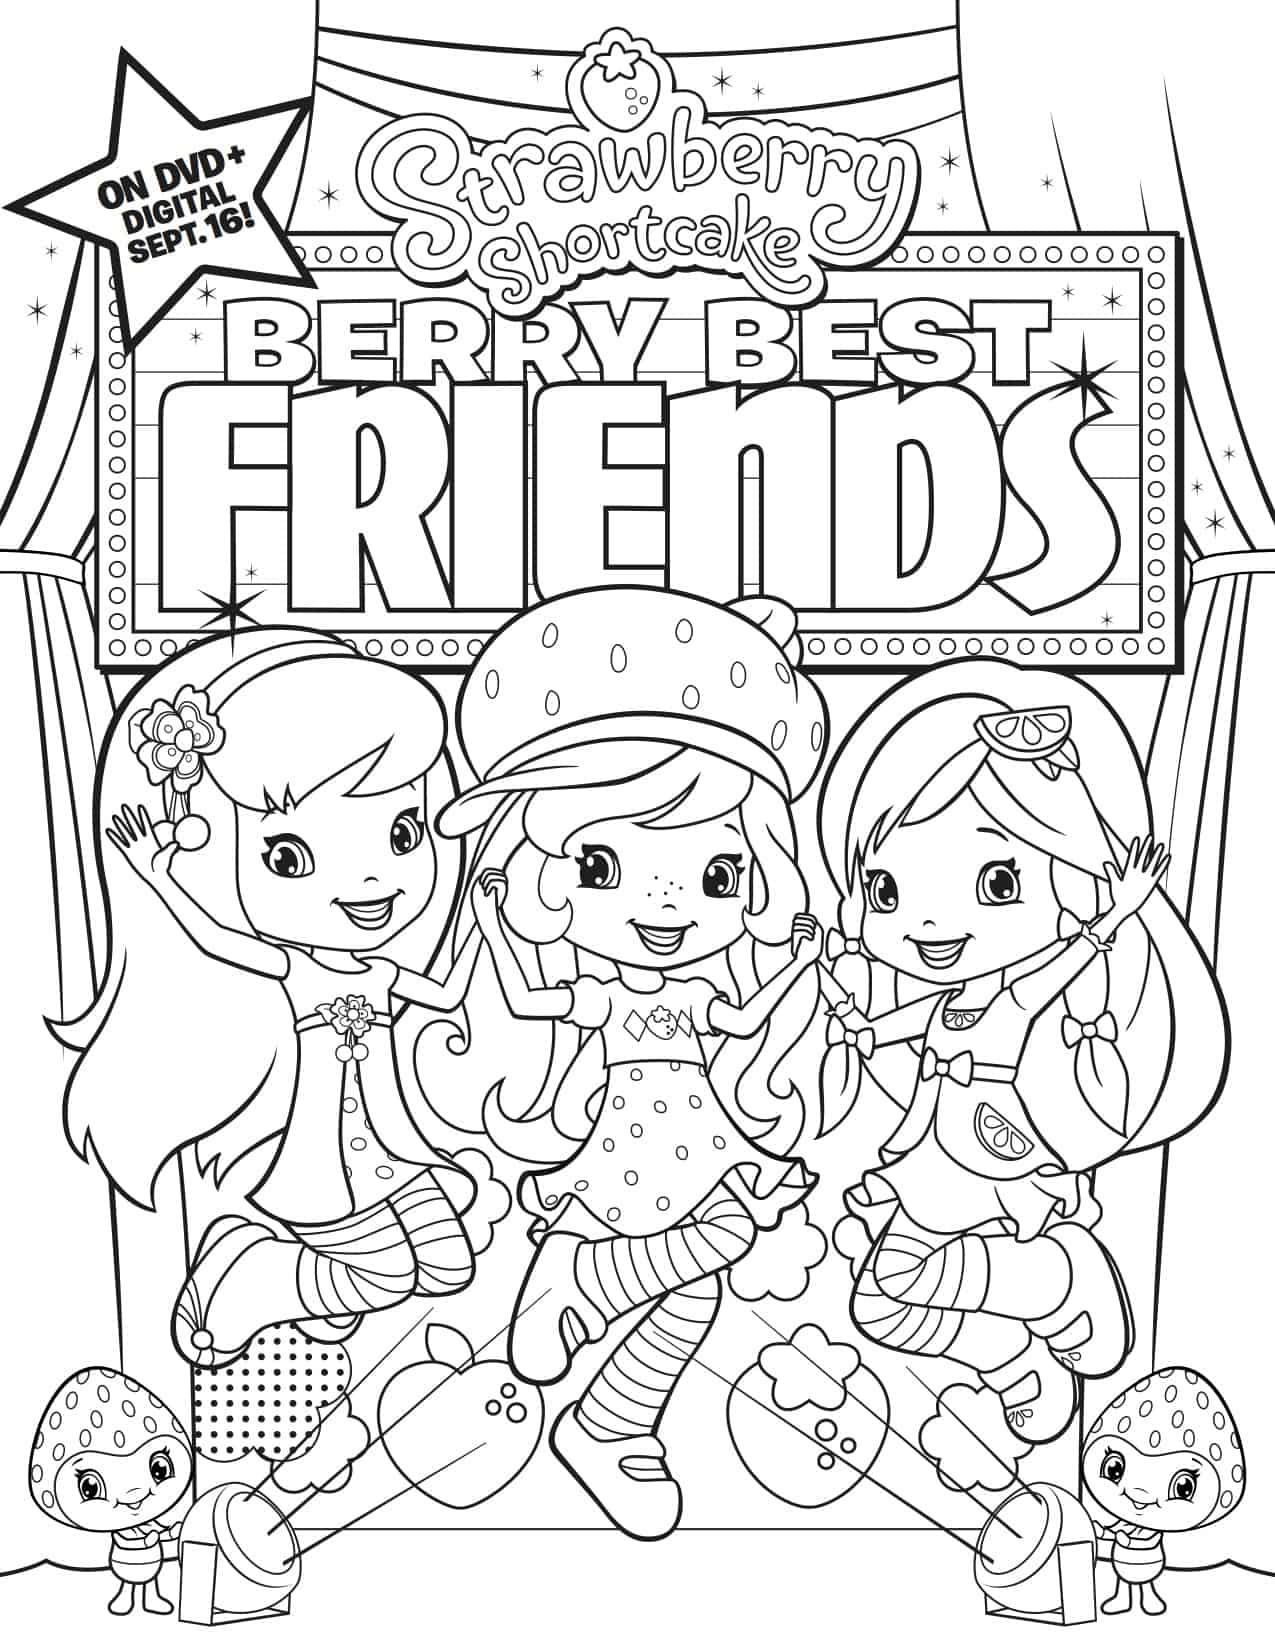 Strawberry shortcake berry best friends coloring sheet two kids and a coupon